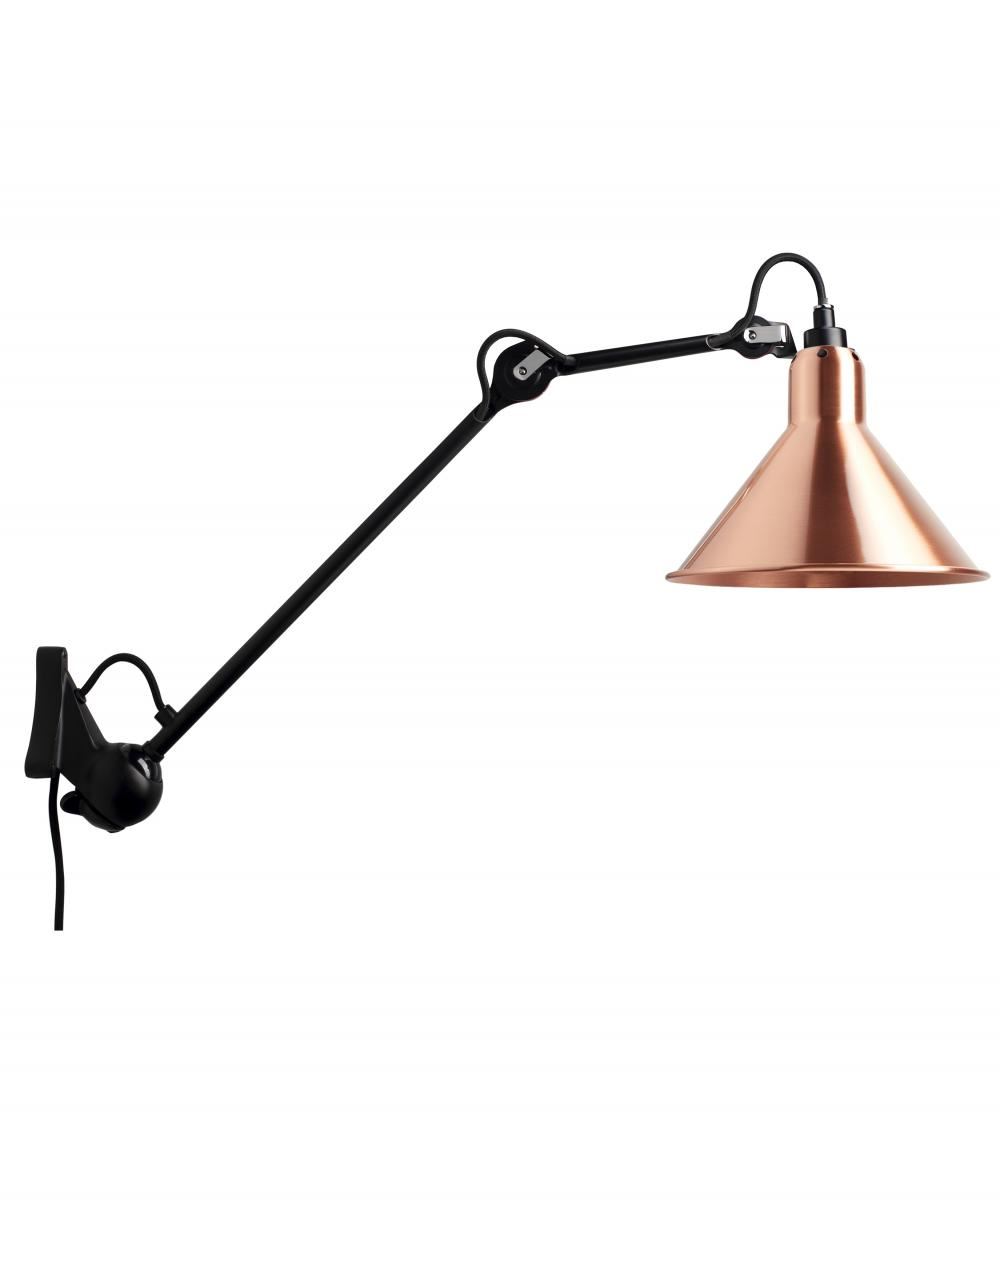 Lampe Gras 222 Wall Light Black Arm Copper Shade With White Interior Conic Shade